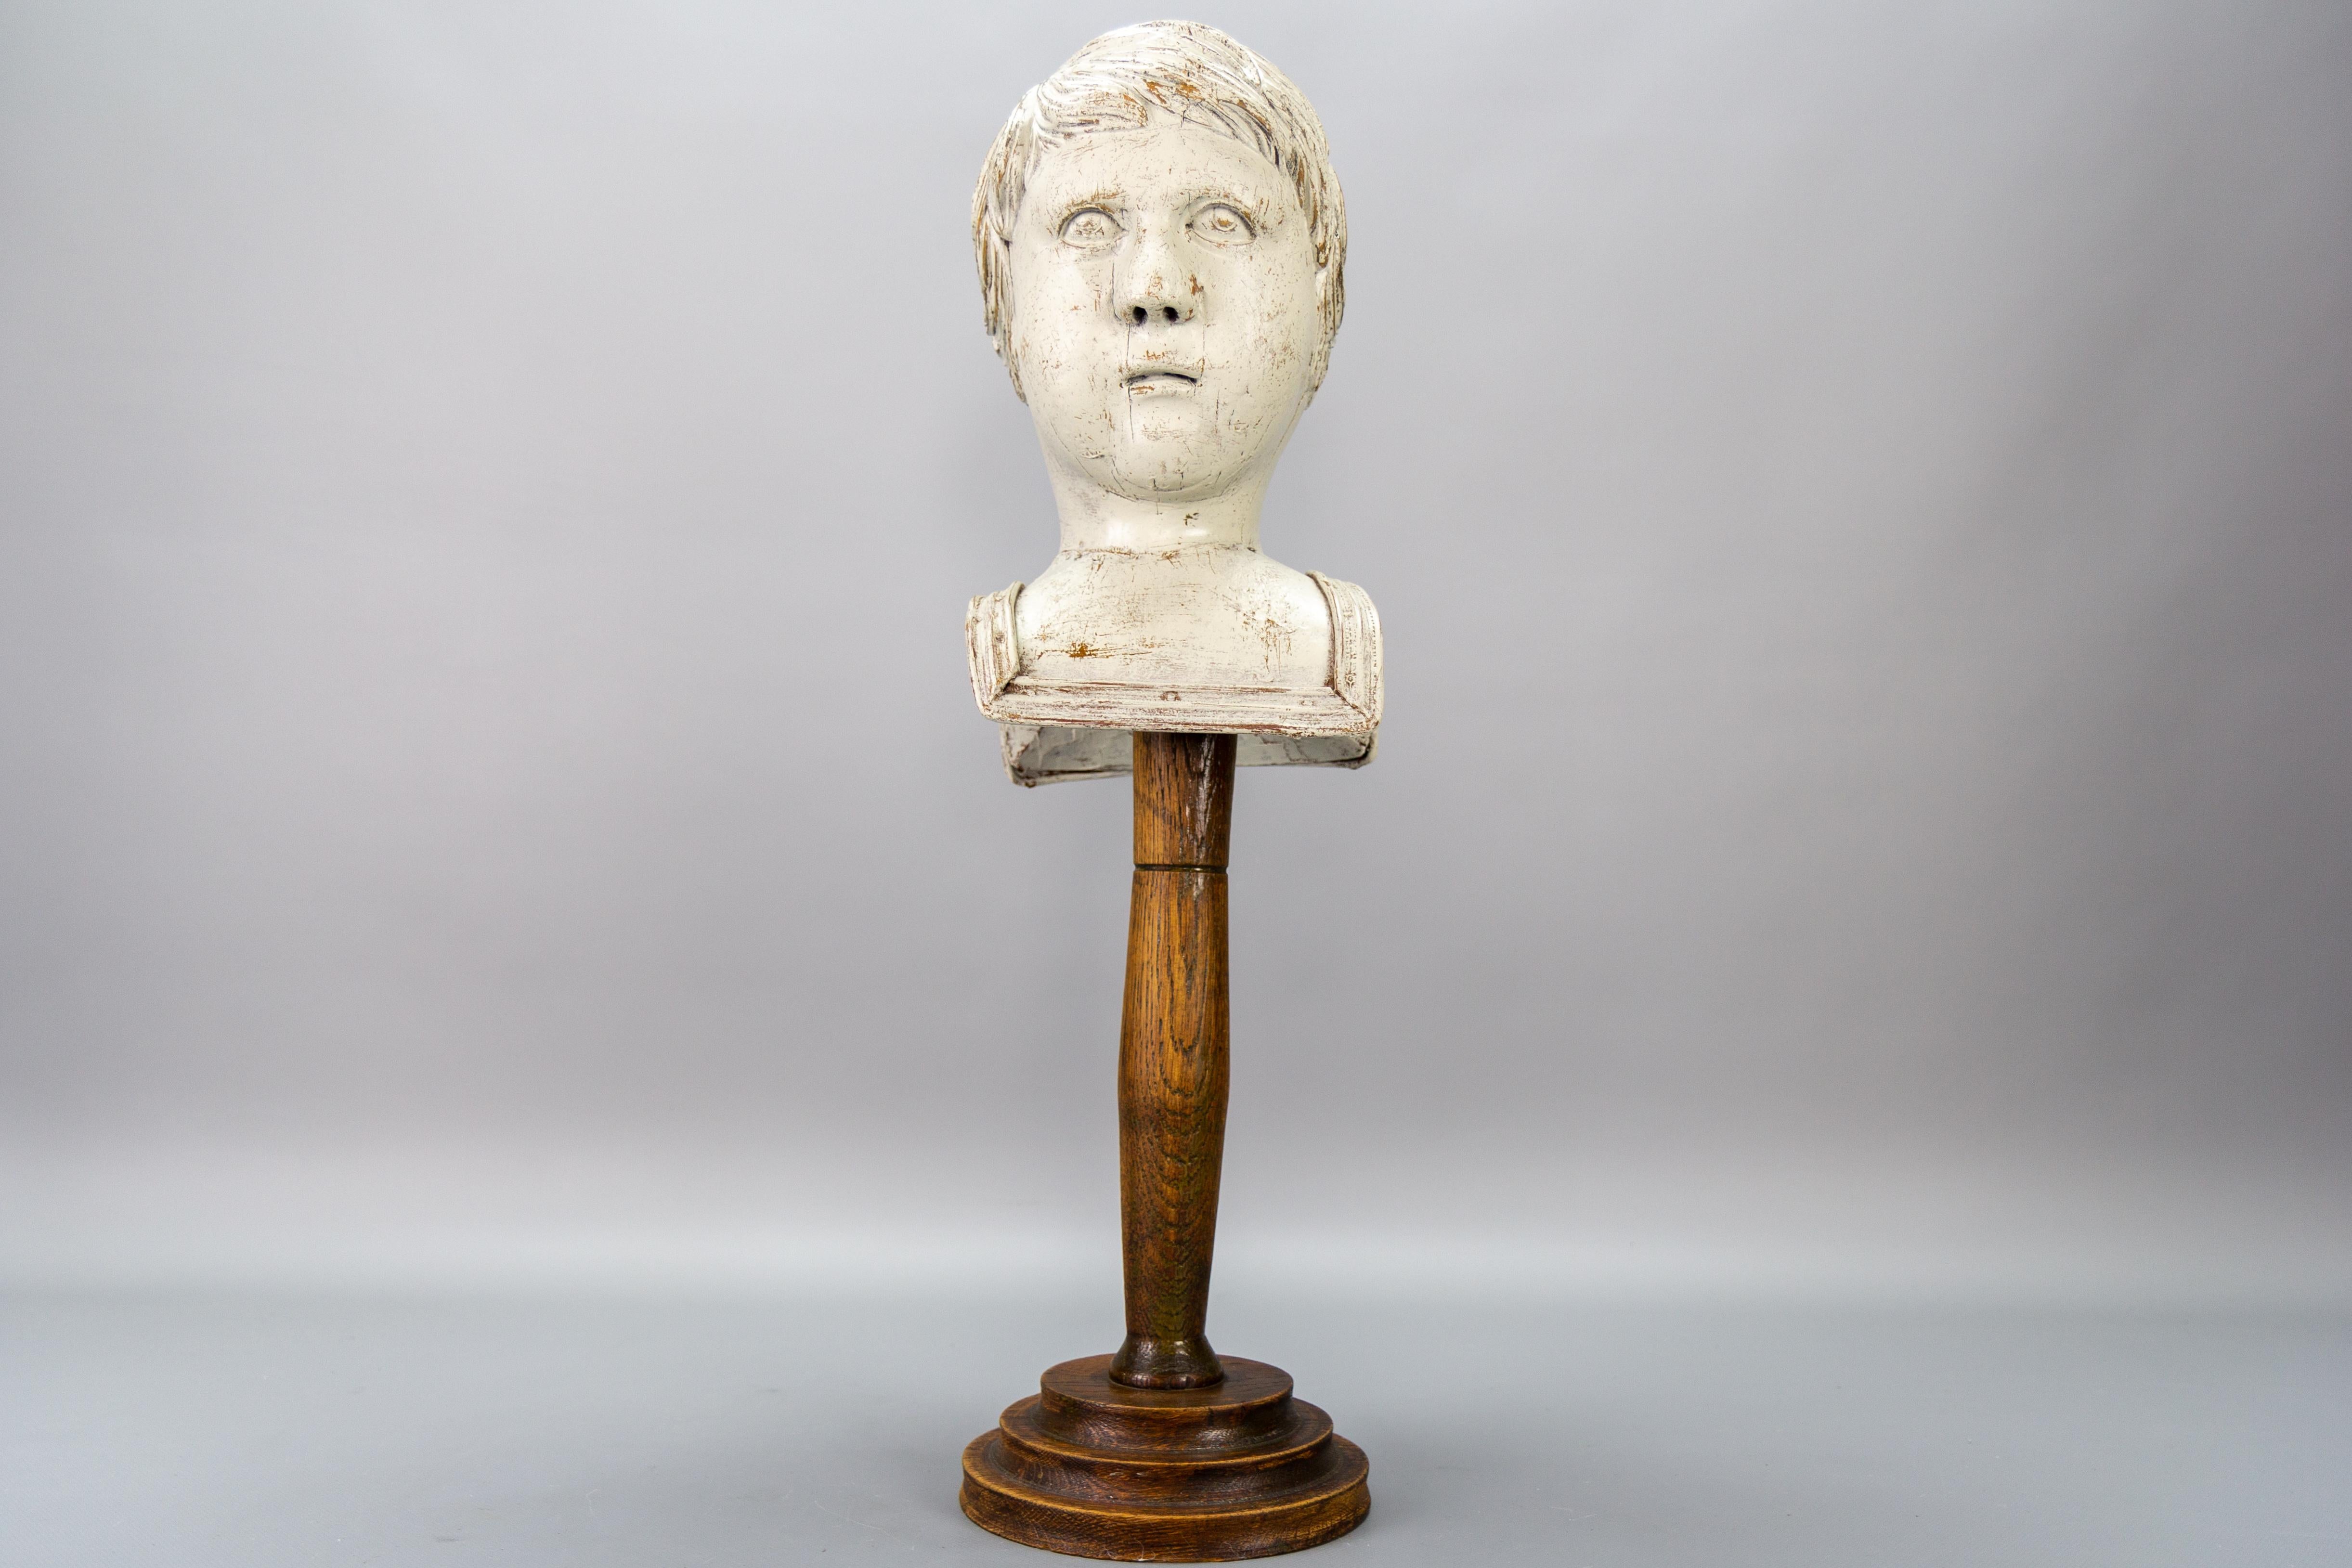 French Whitewashed Carved Wooden Sculpture Head or Bust on a Pedestal For Sale 4